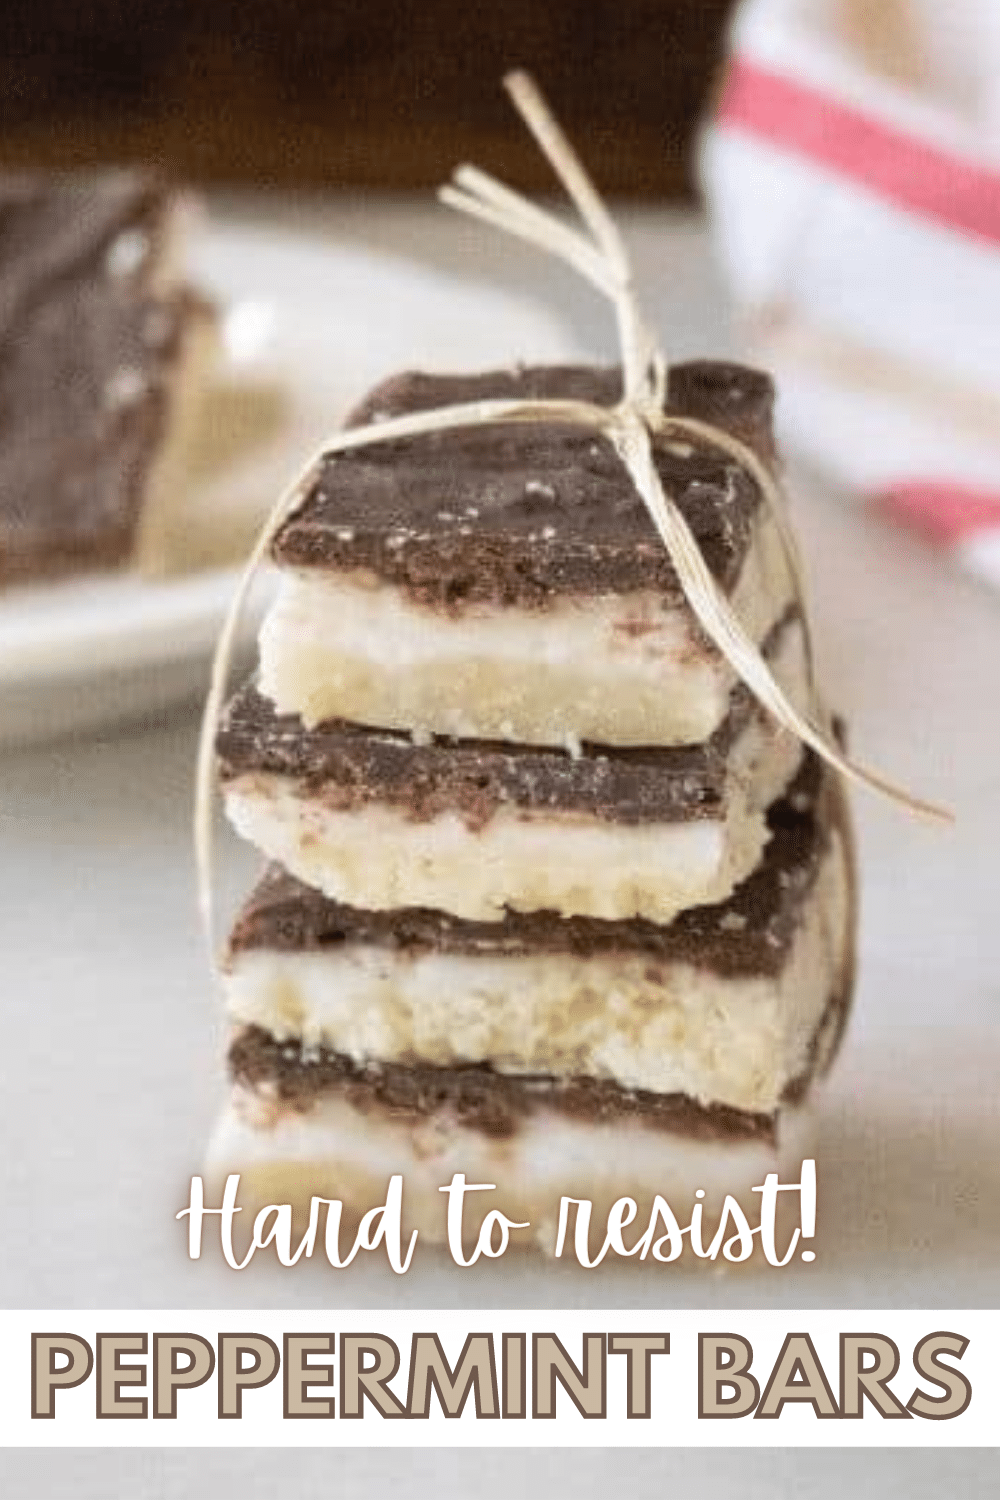 The delicious flavors of these peppermint bars will keep you wanting more. Chocolate and peppermint combine perfectly in an easy dessert recipe. #peppermint #dessert #peppermintbars via @wondermomwannab